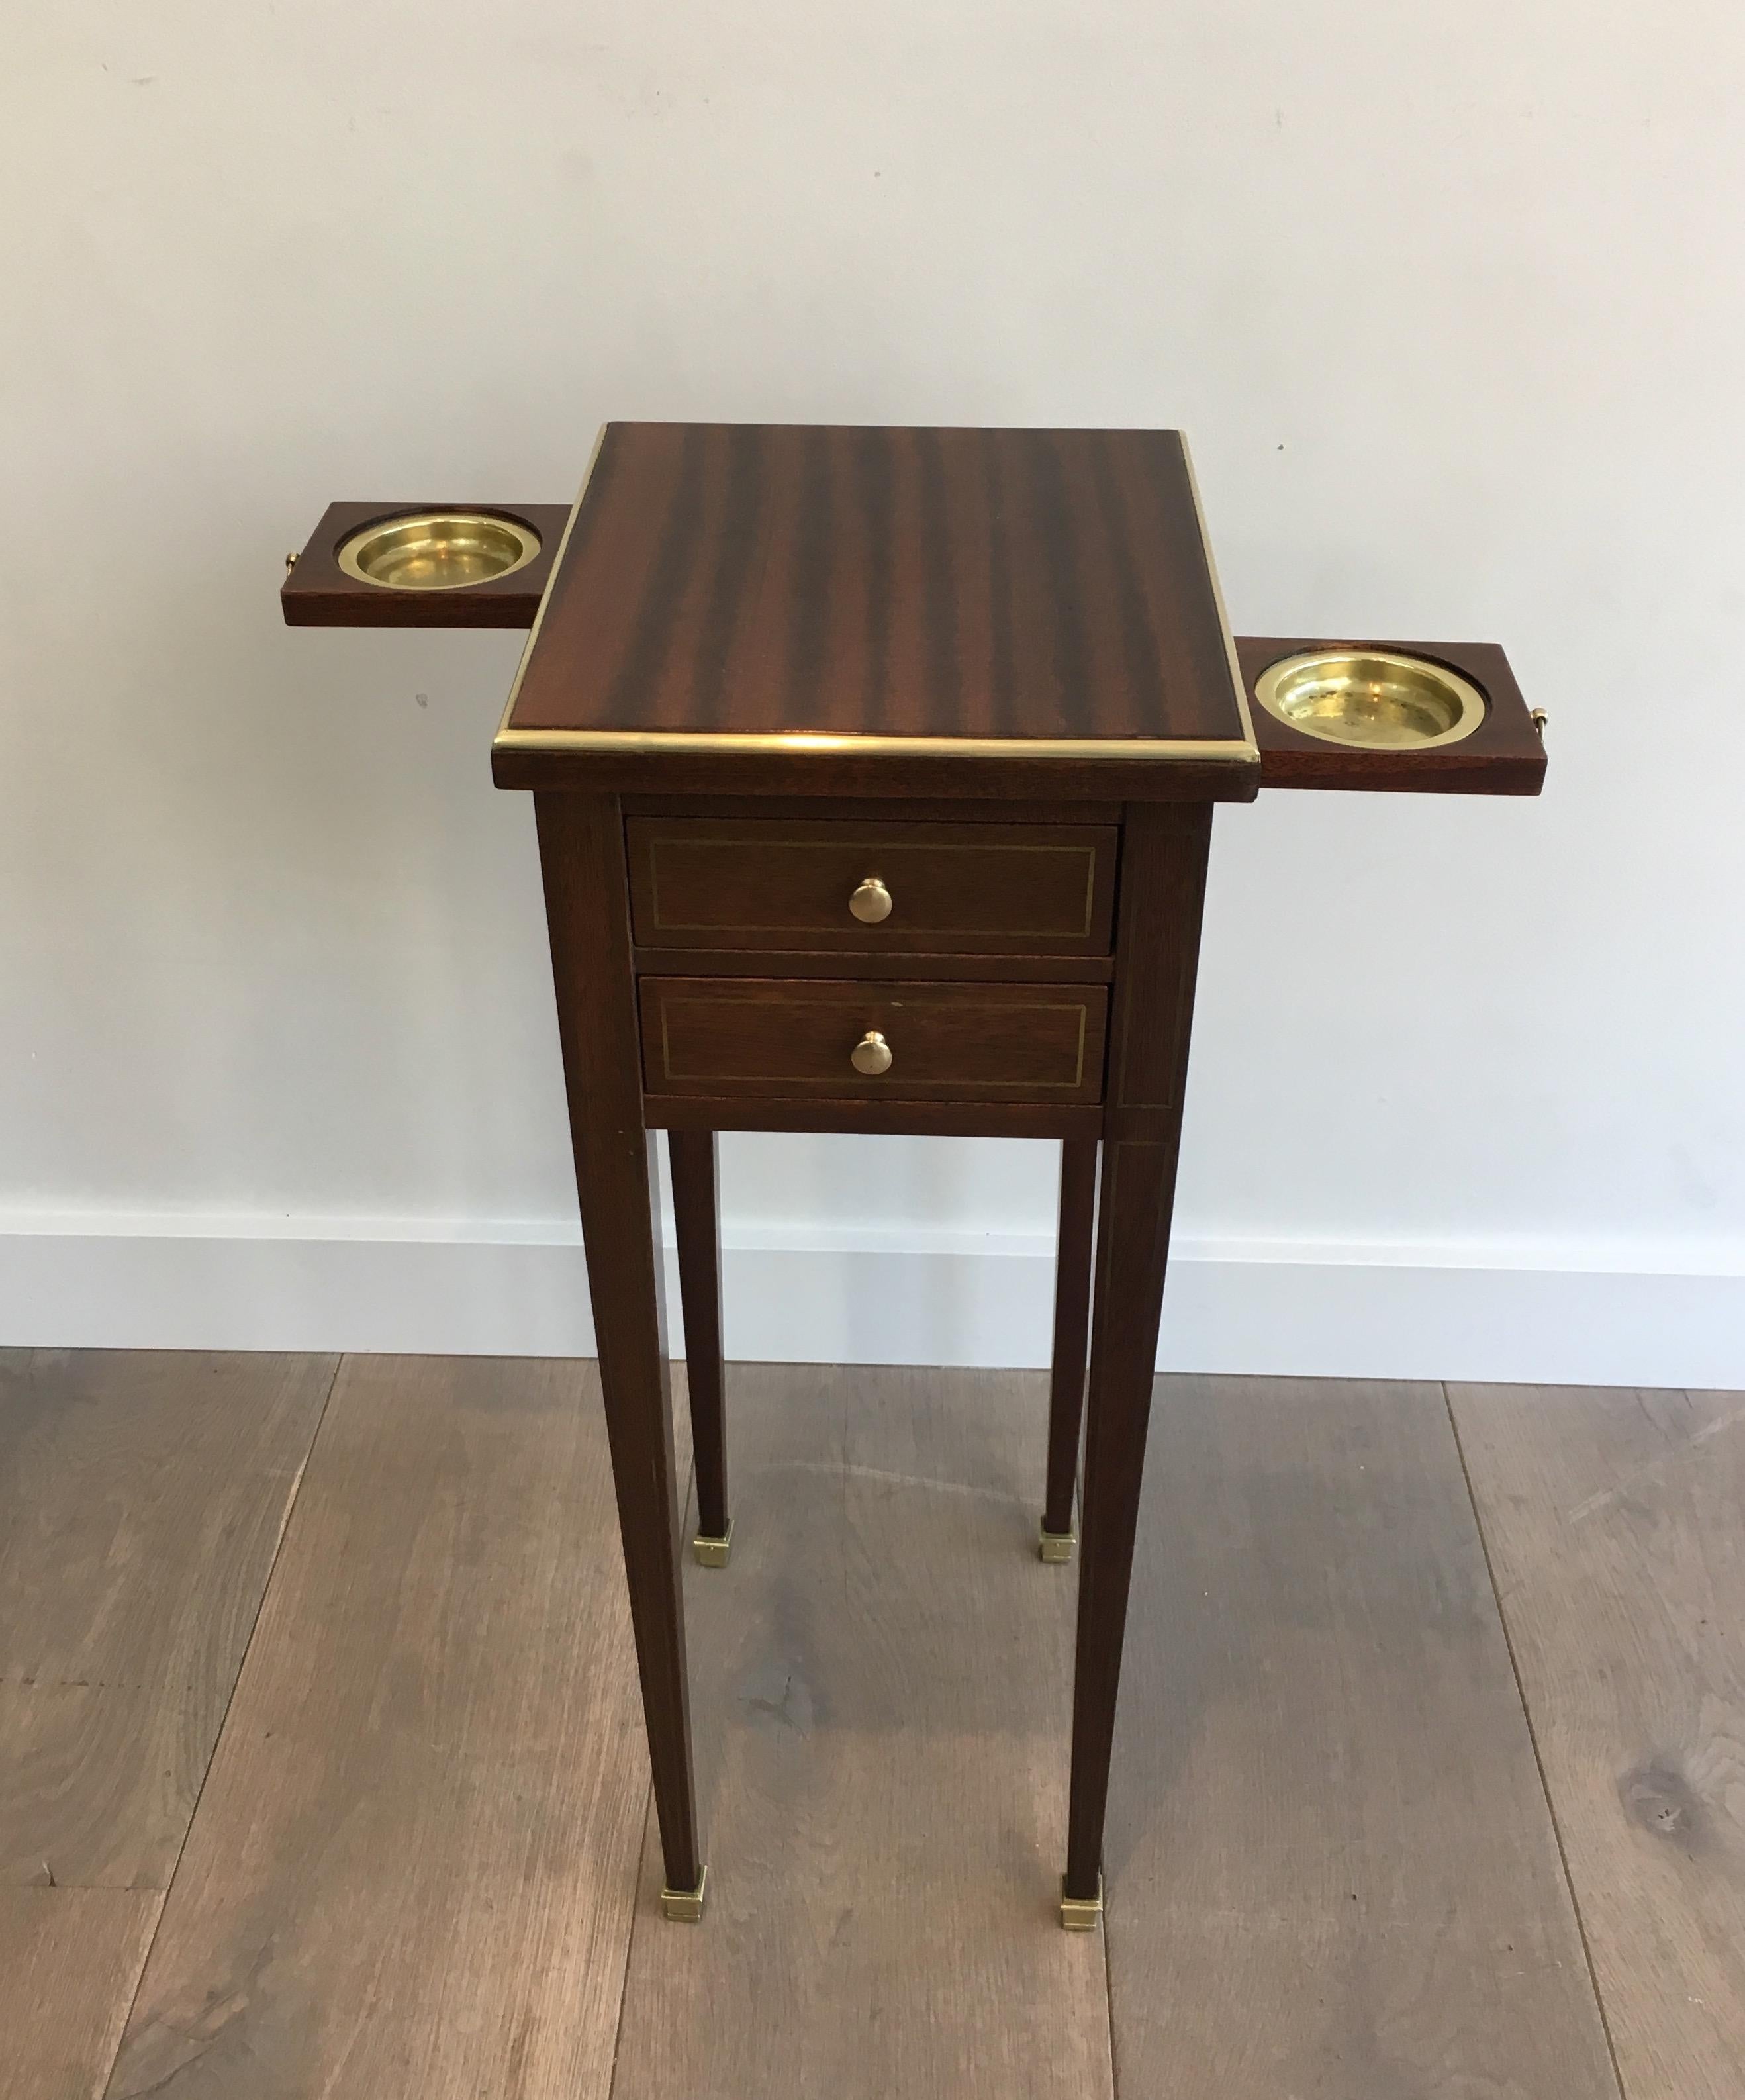 This rare and unusual neoclassical small drawers table is made of mahogany and brass. It has small sliding ashtrays on each side. This is a French work, in the style of famous French design Maison Jansen, circa 1940.